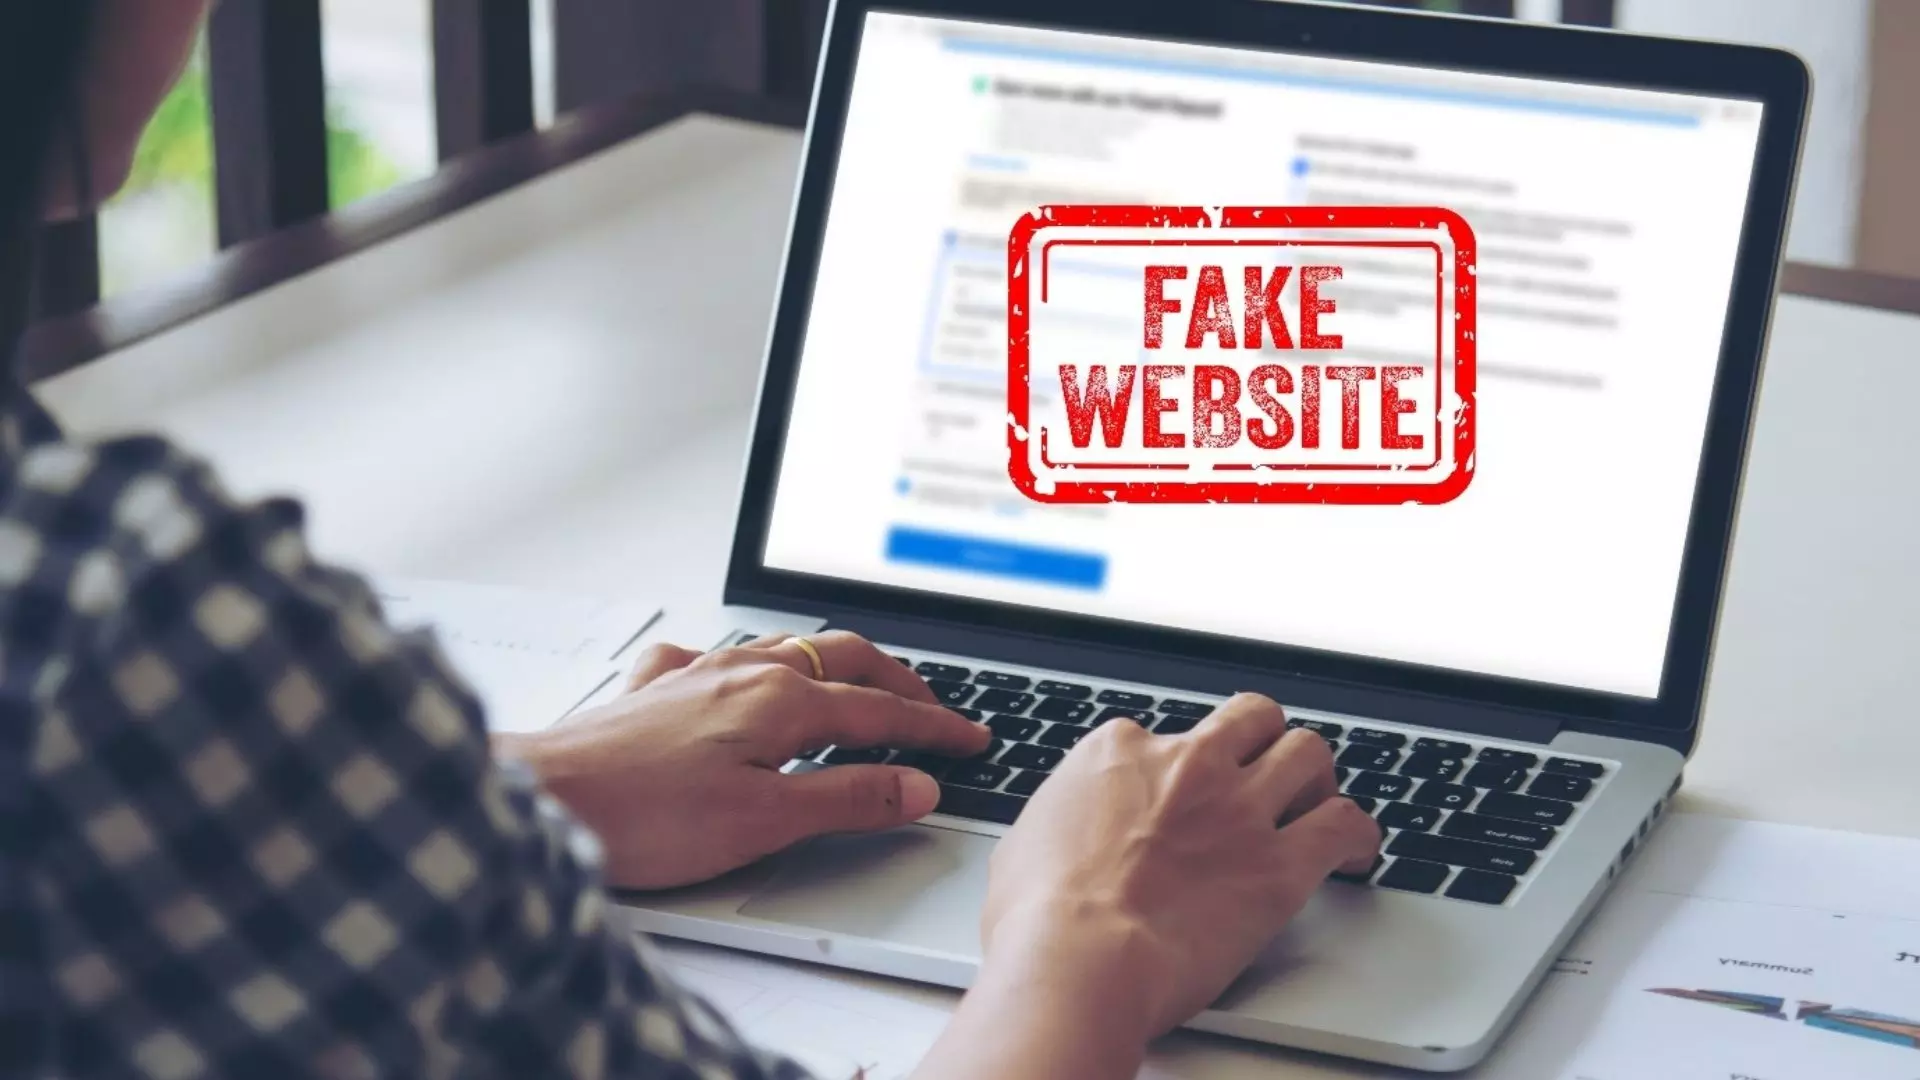 Cyber Police Announced The 6 Fake Websites to Alert The People From Cyber Crime